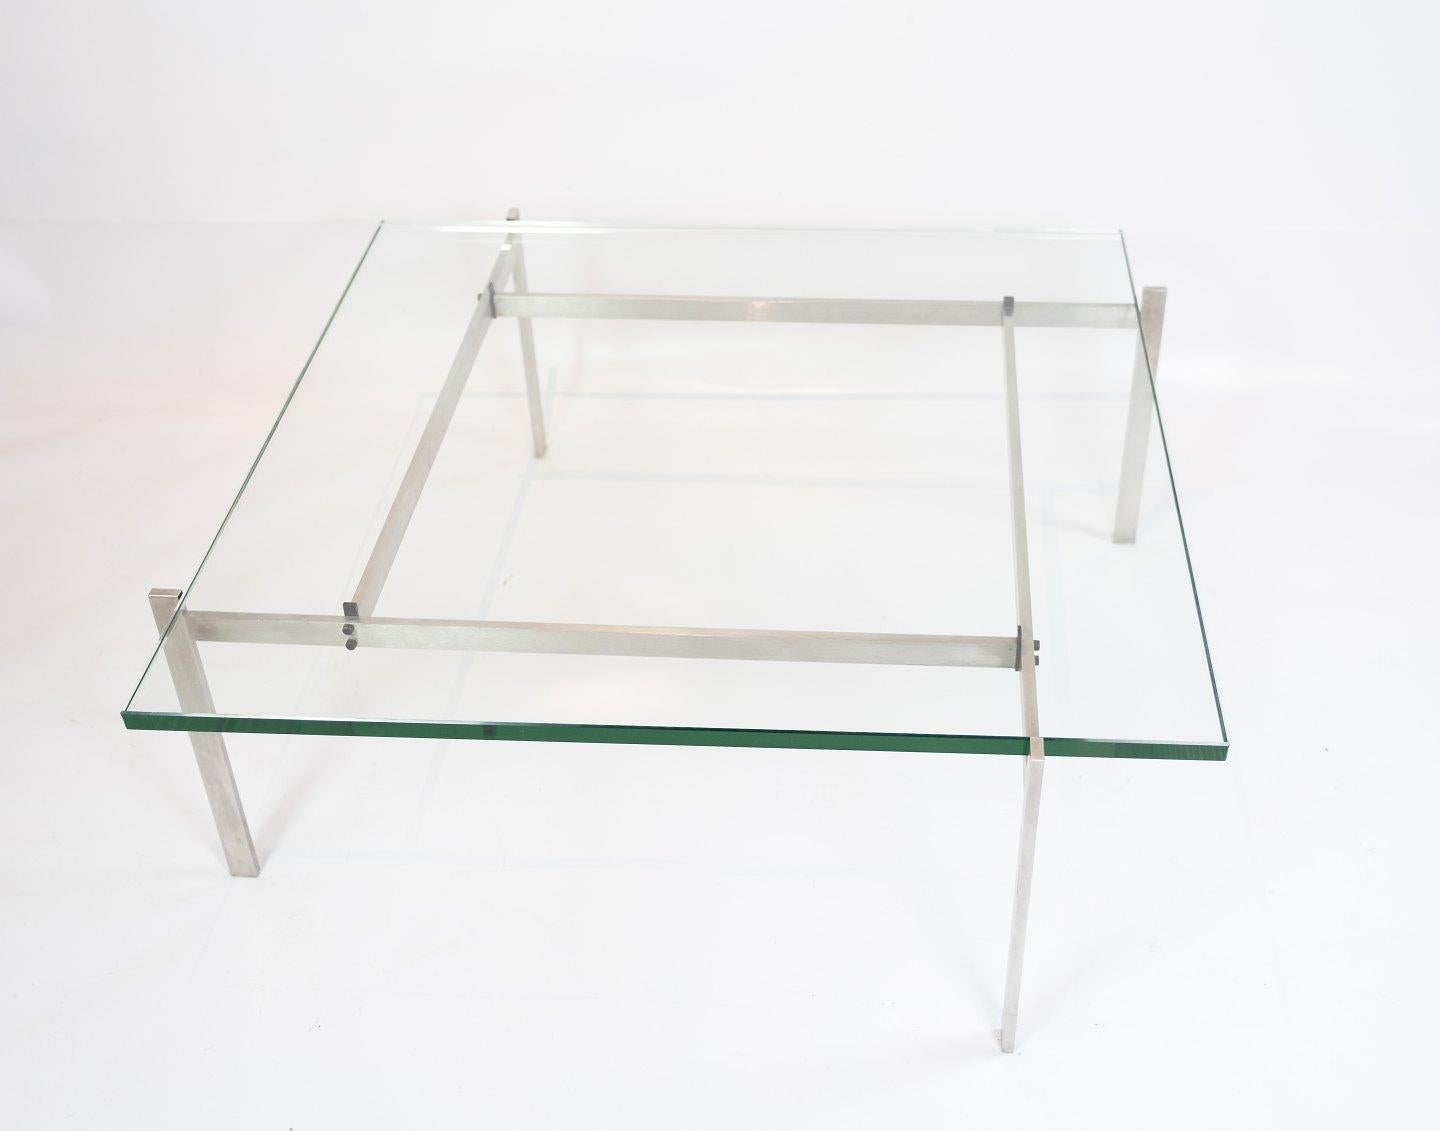 Coffee table, model PK61, of glass and stainless steel designed by Poul Kjærholm and manufactured by Fritz Hansen. The table is in great vintage condition.
  